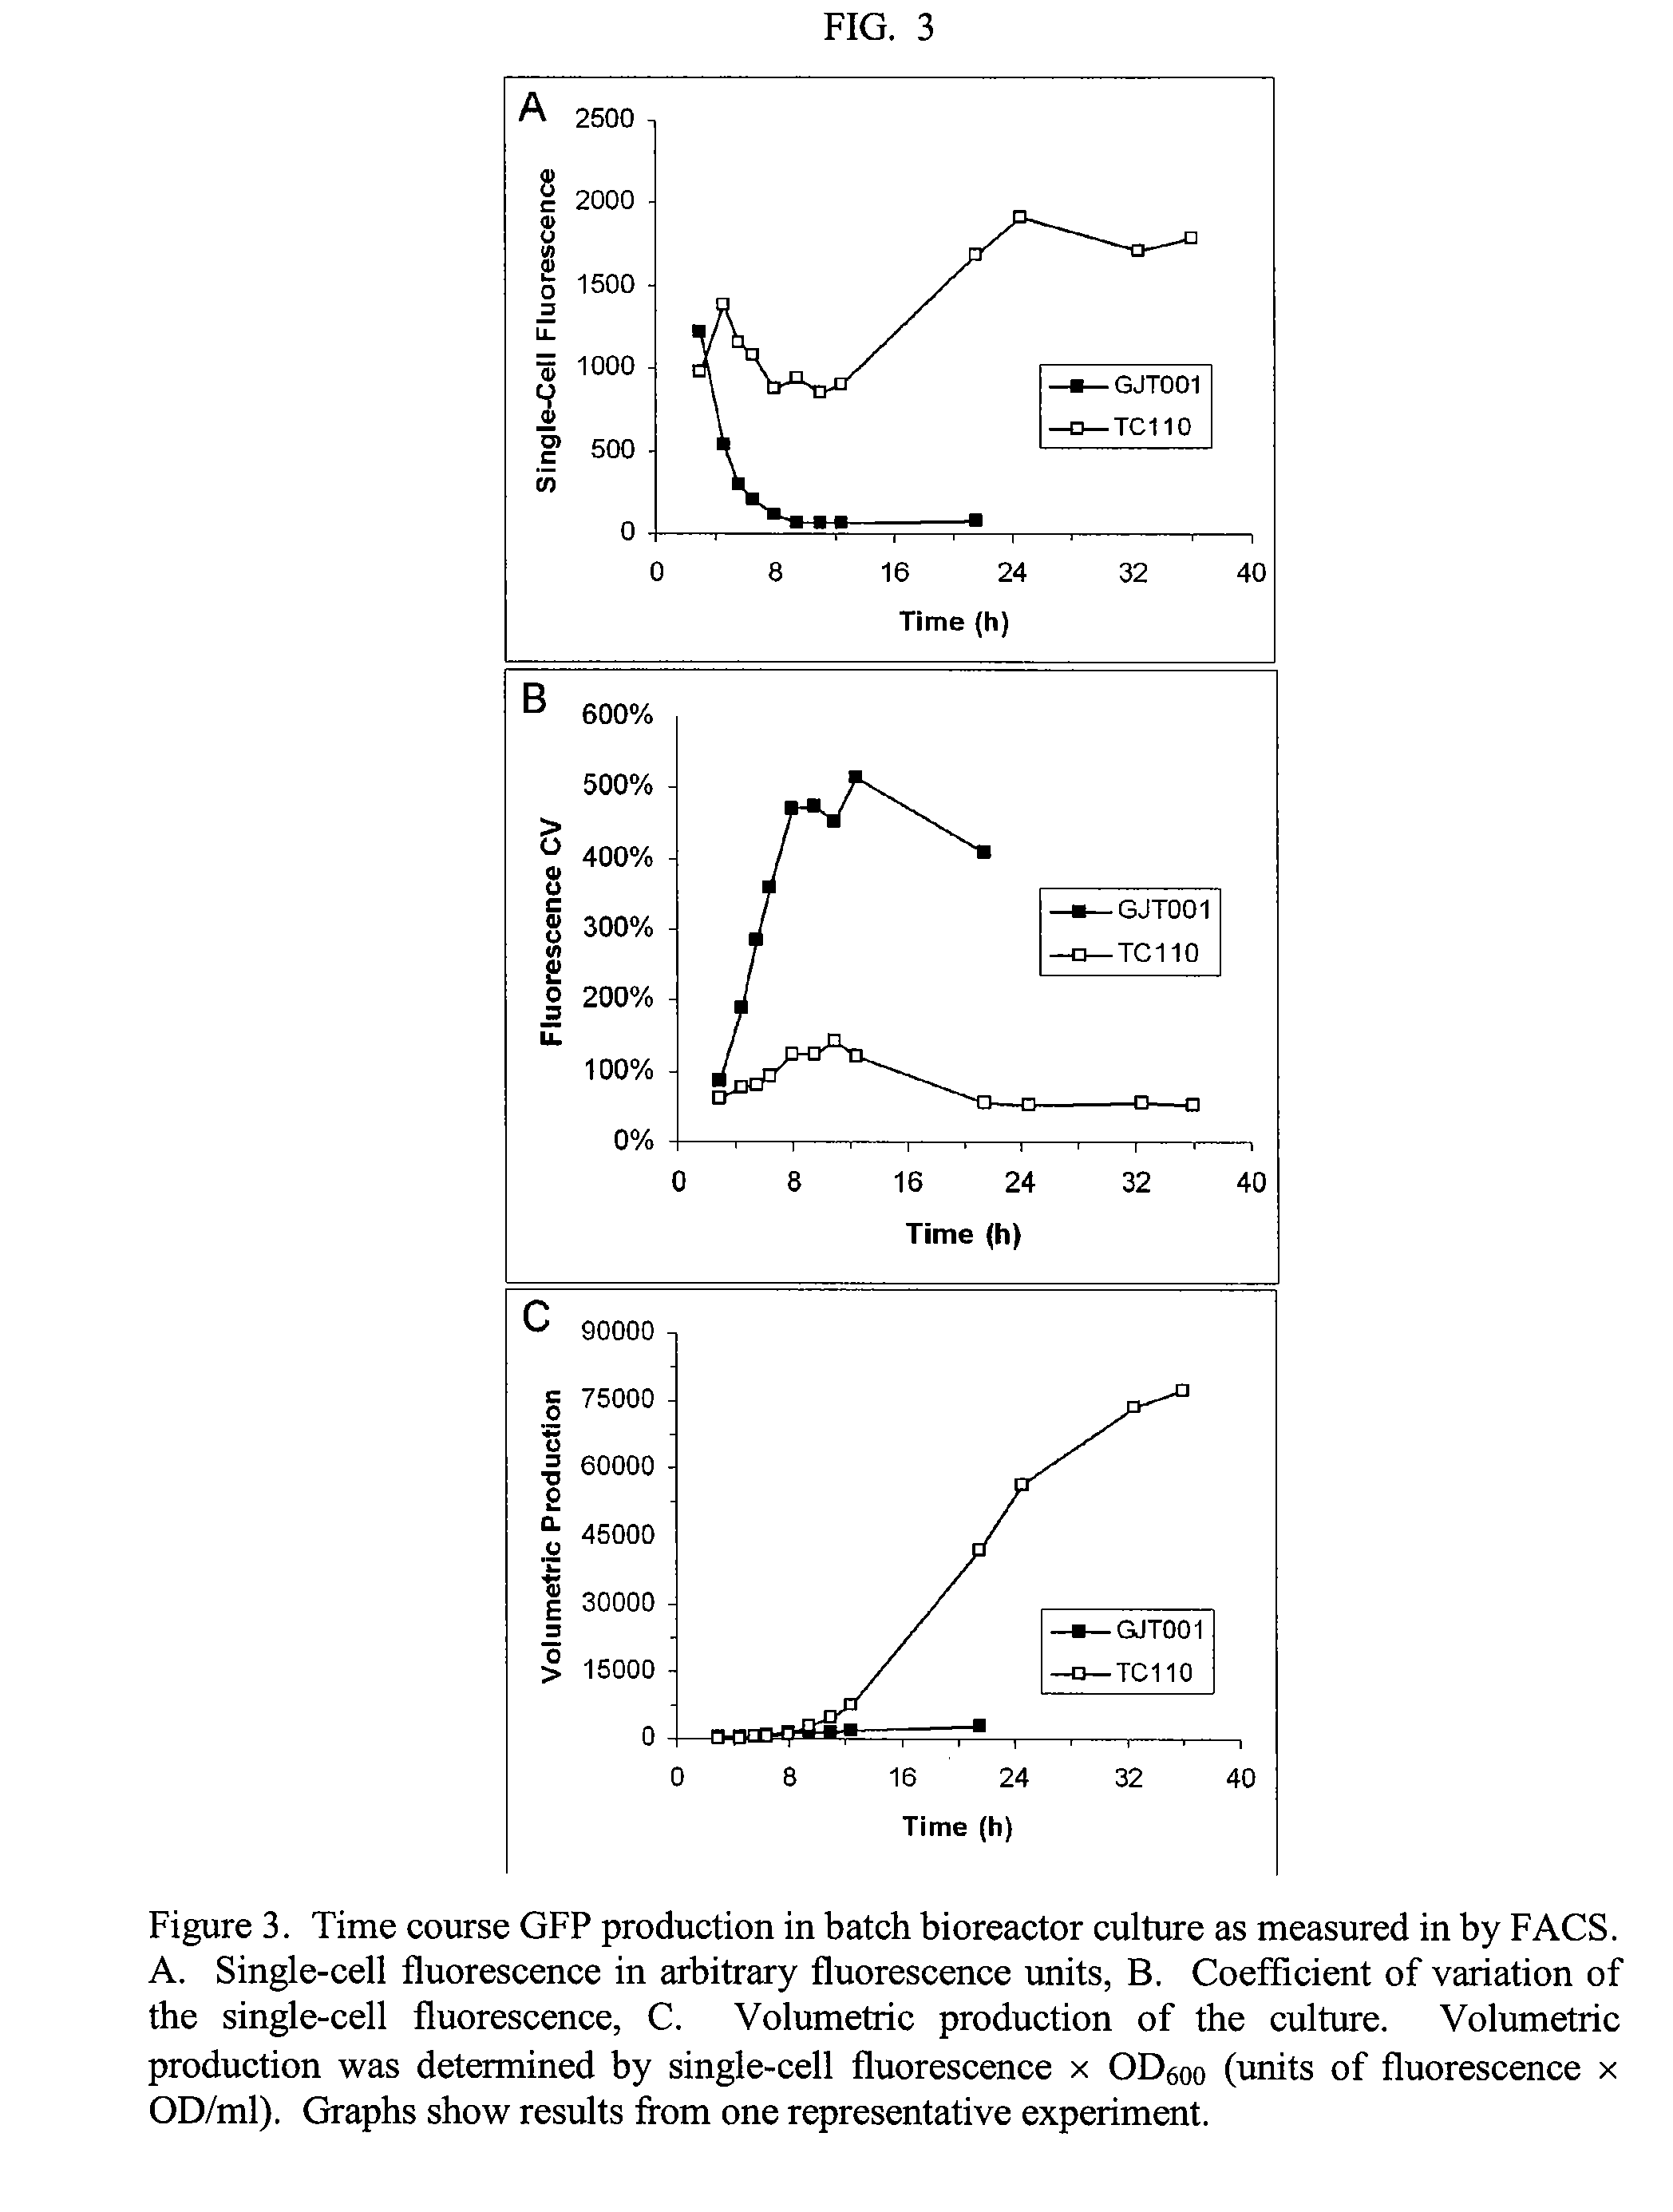 Reduced phosphotransferase system activity in bacteria